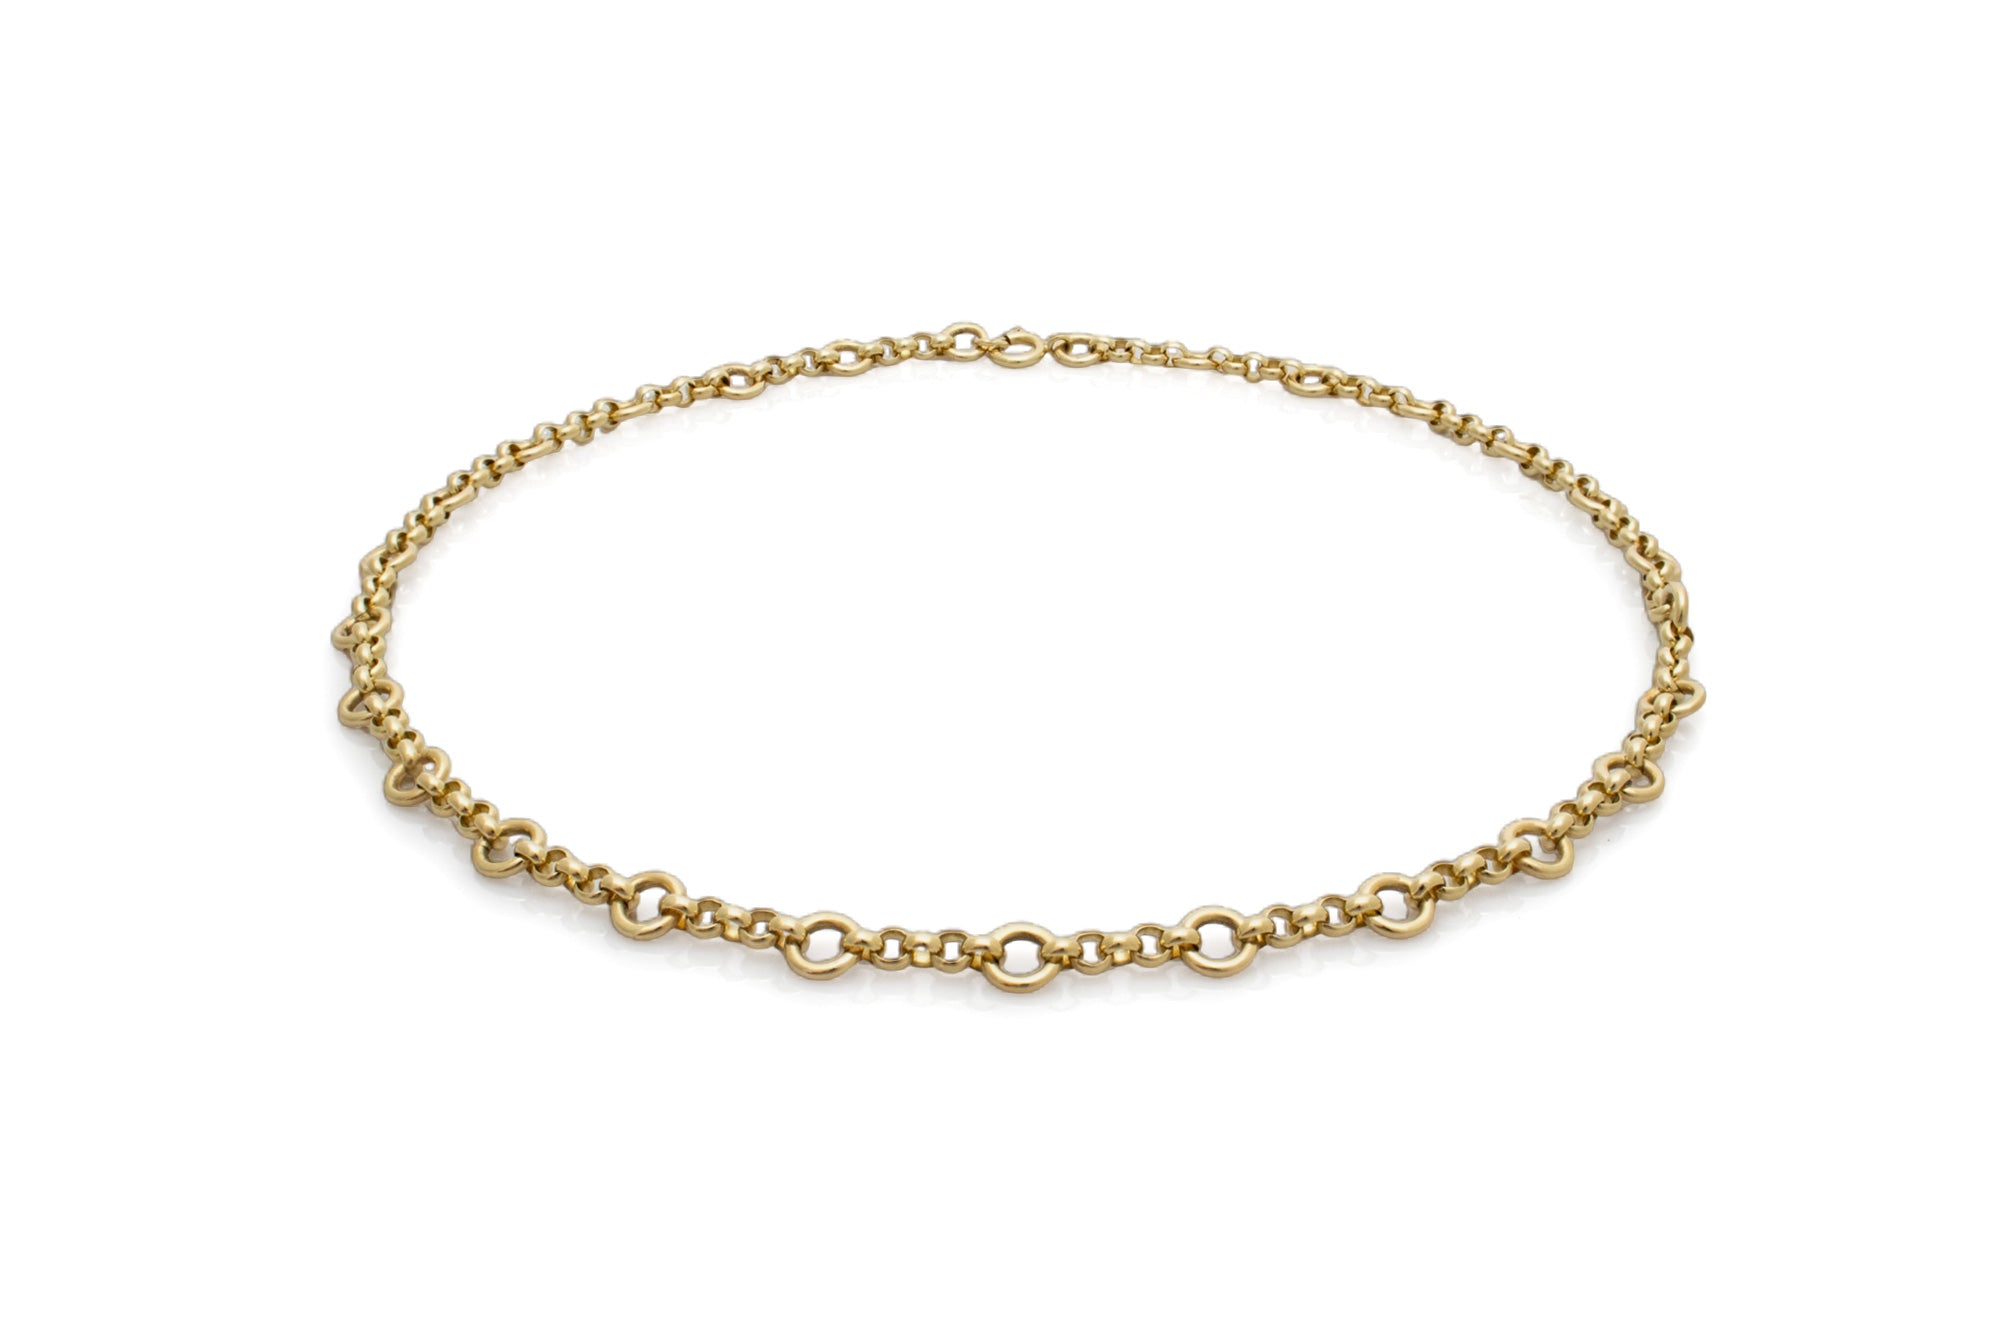 Little & Large necklace. Gold chain necklace. Solid gold chain necklace. Beautiful necklace. Charm necklace. Serena Ansell Jewellery. Fine jewellery London.